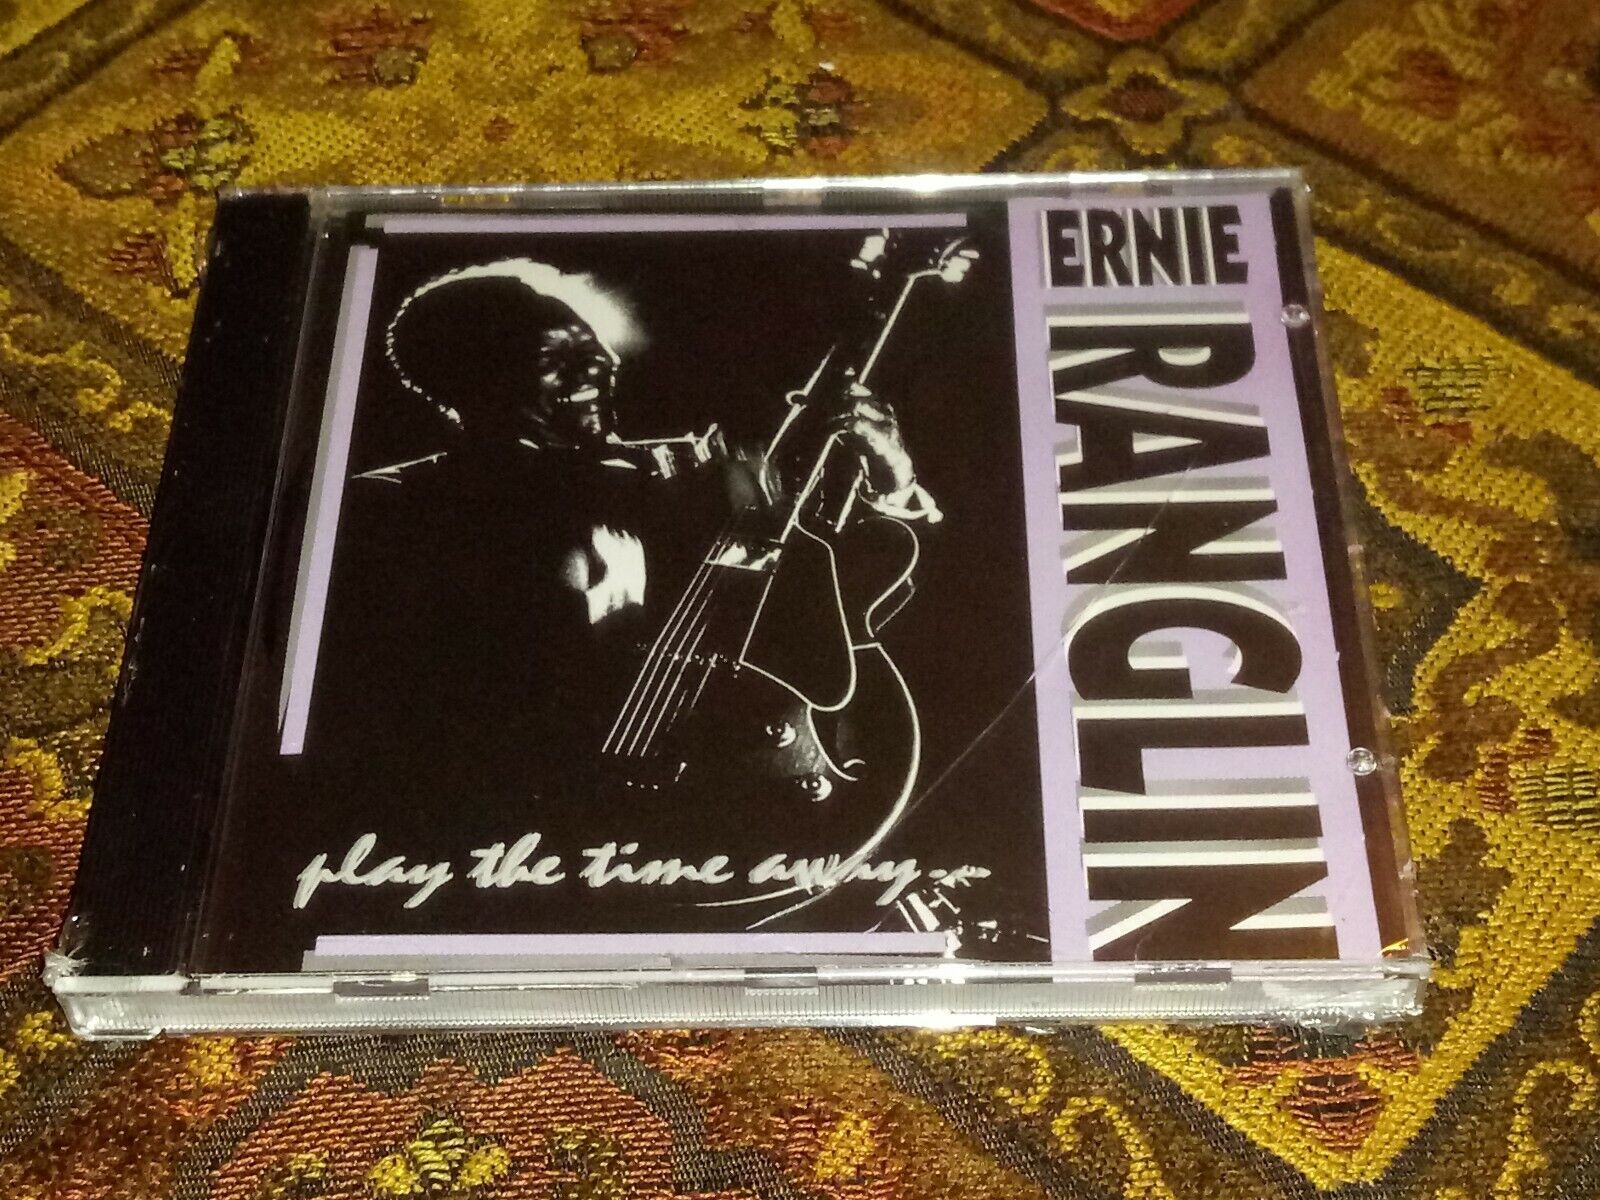 Play The Time Away By Ernie Ranglin CD Grove Music Limited 1996 Sealed New